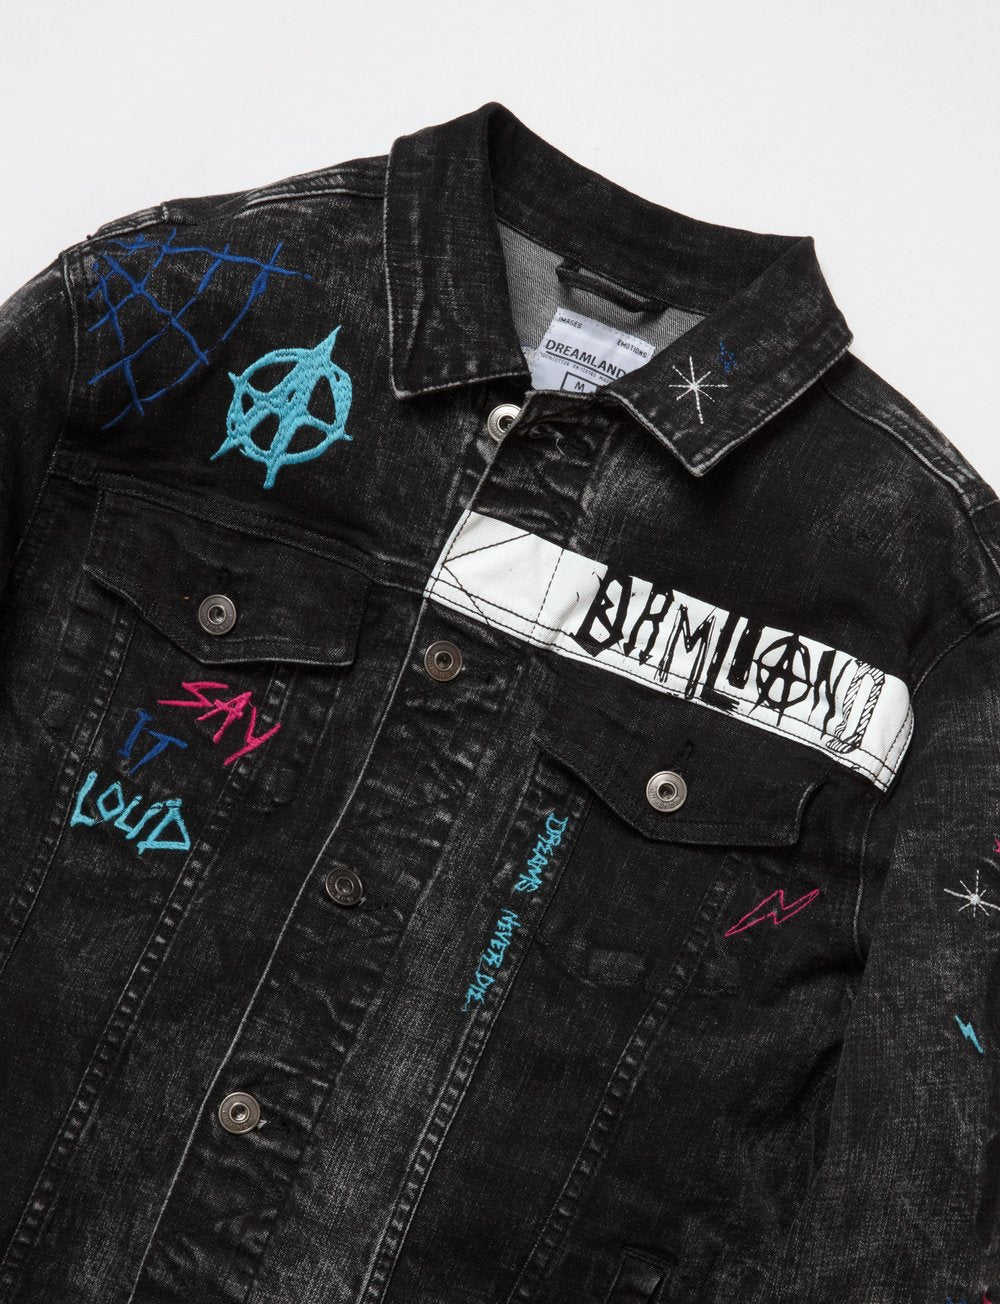 Dreamland-Disobedient Jean Jacket-D2002O0226